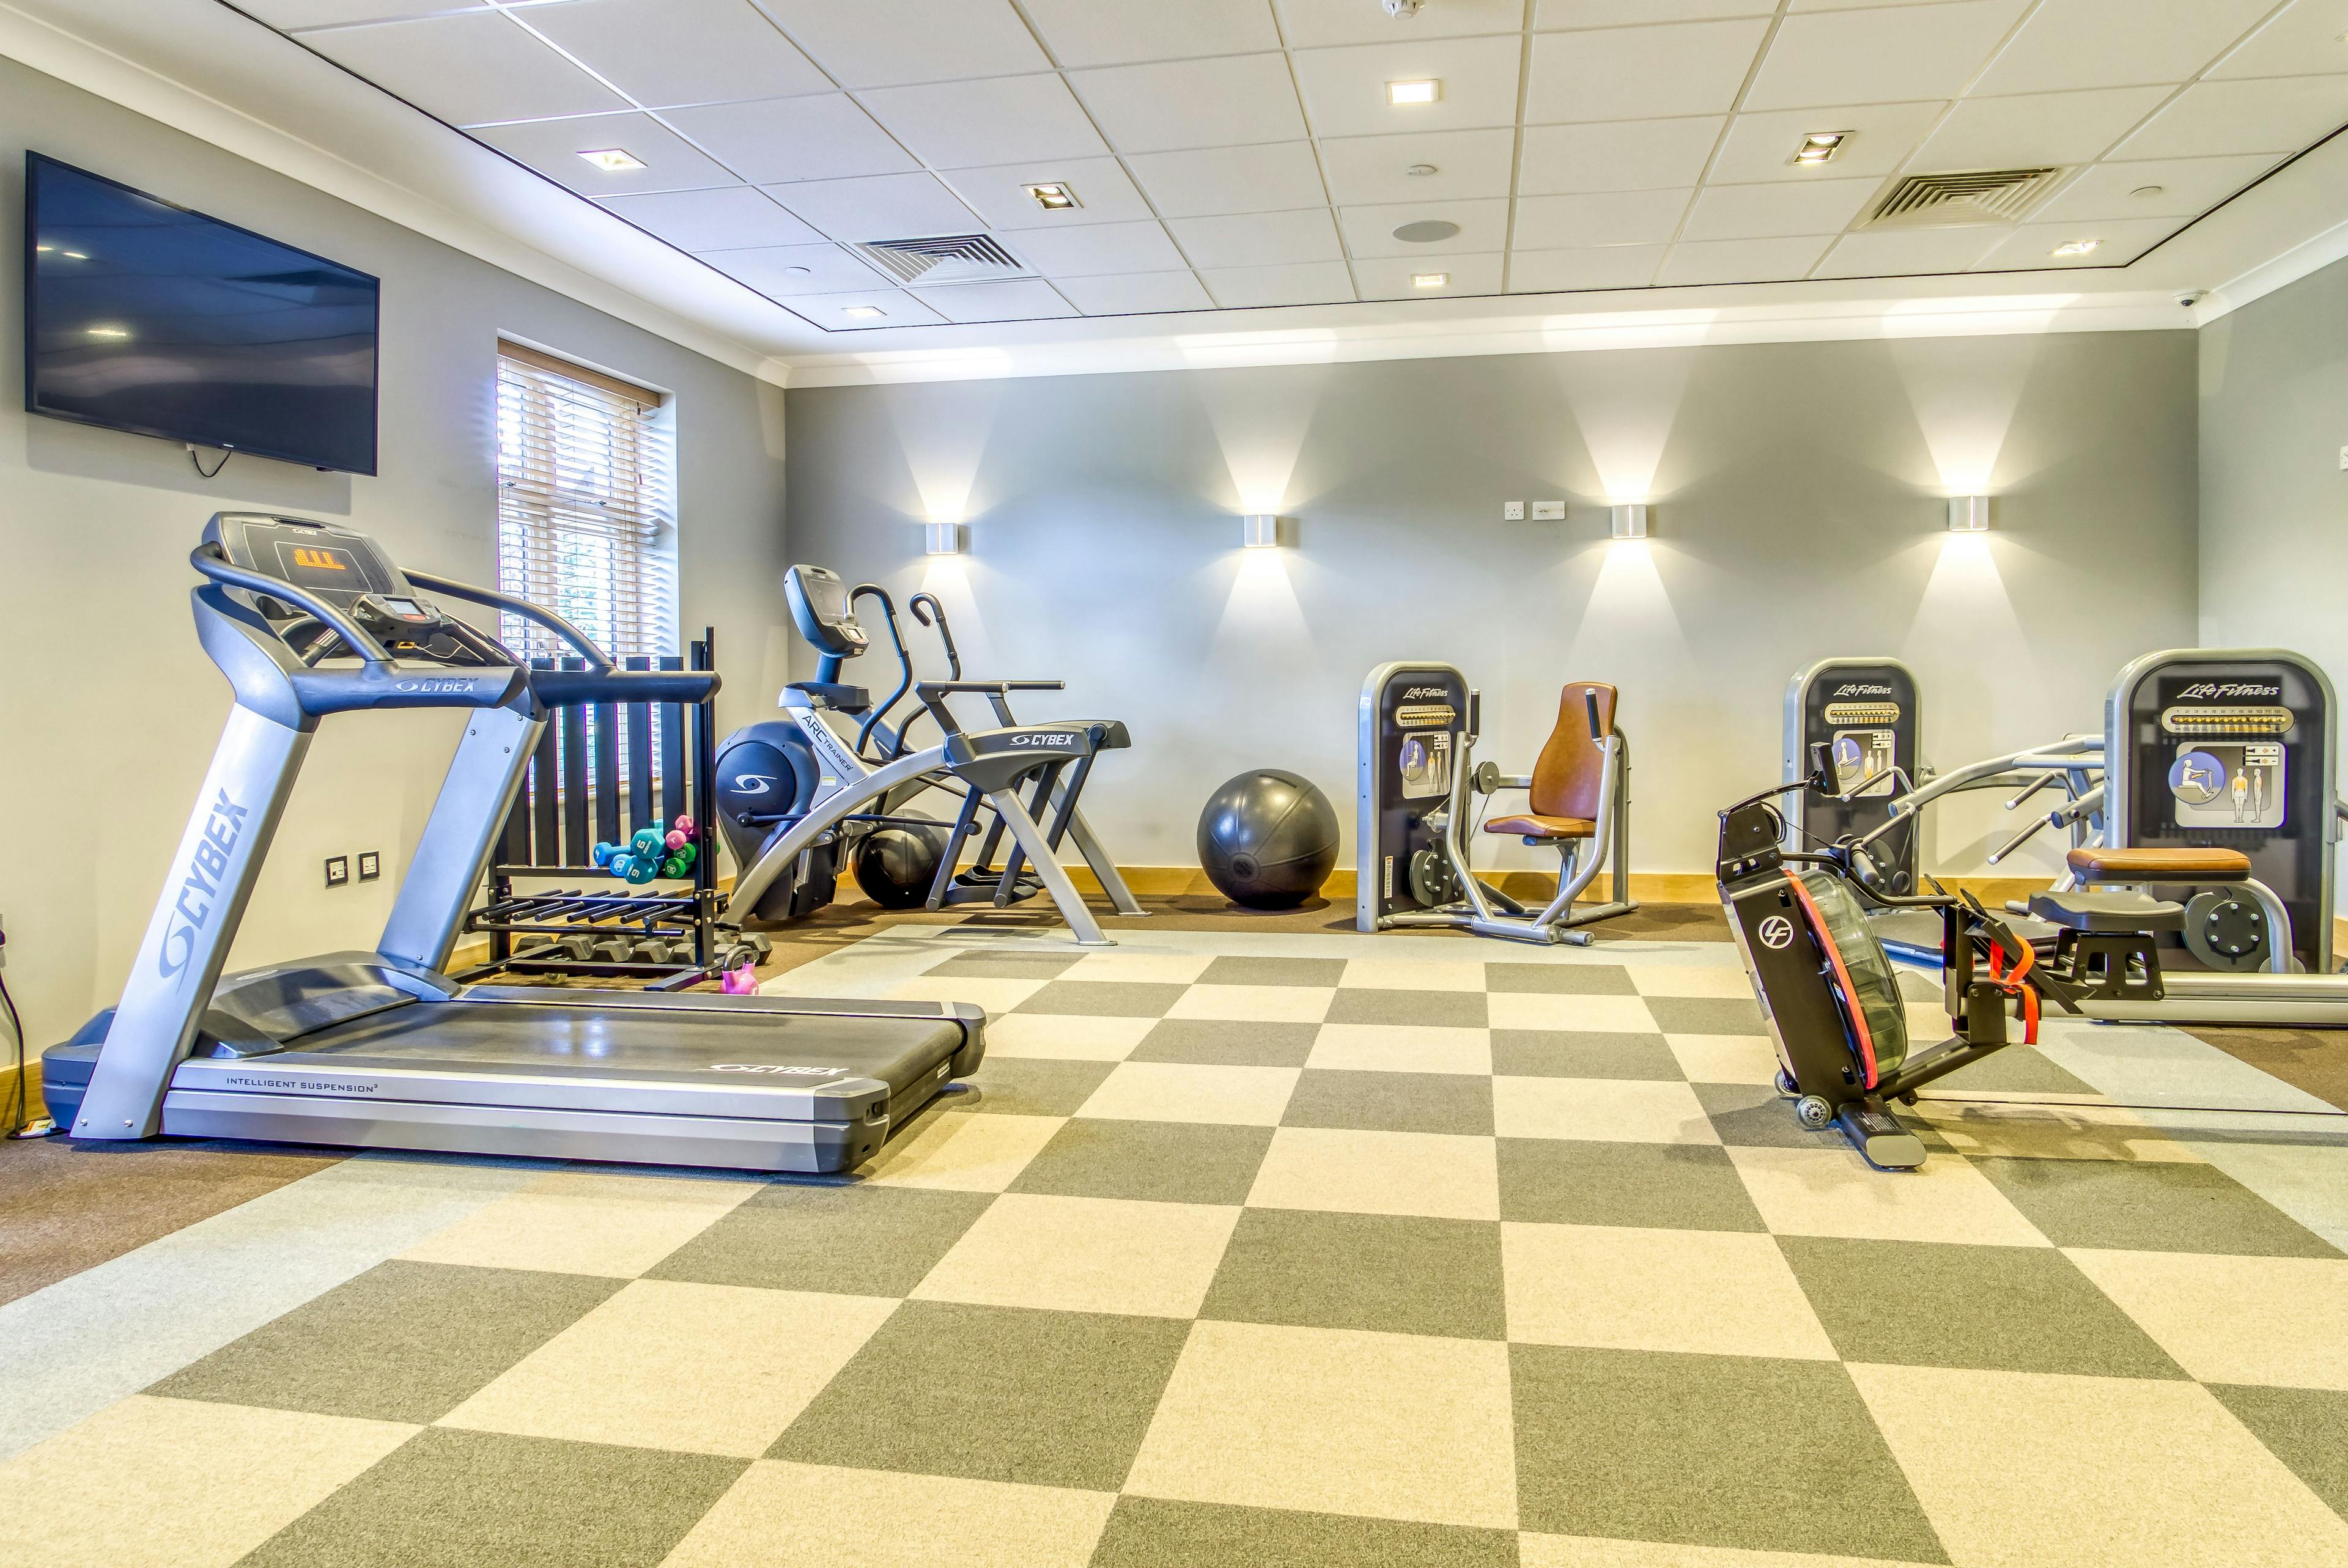 Gym of Aston-on-Trent care home in Aston-on-Trent, Derbyshire